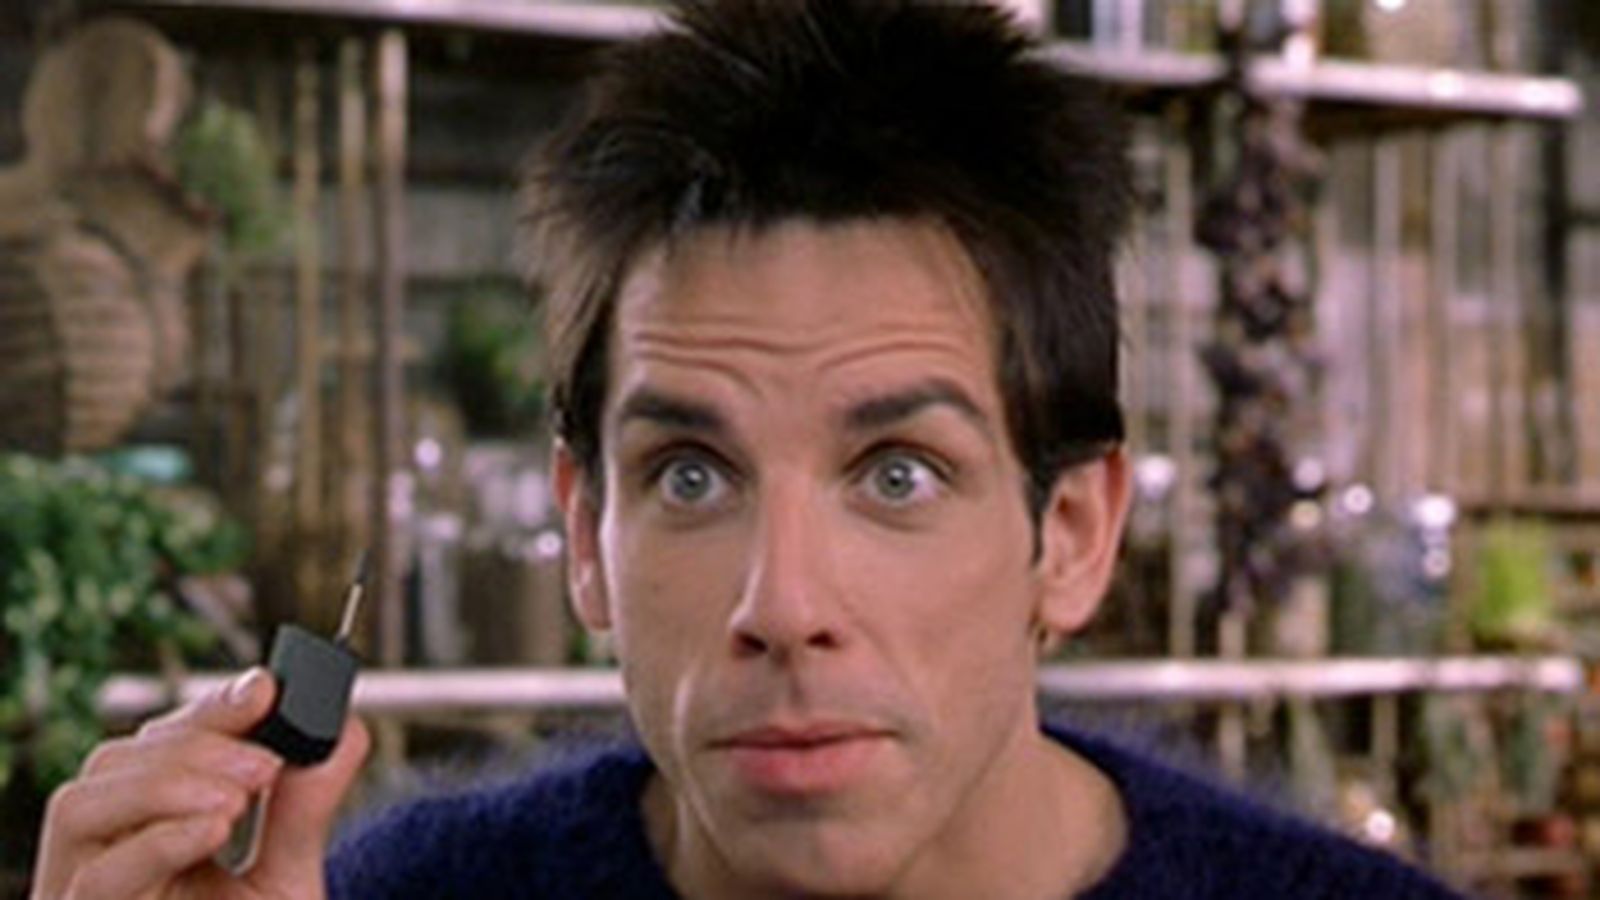 Derek Zoolander ditched his tiny flip phone for a giant Samsung ...